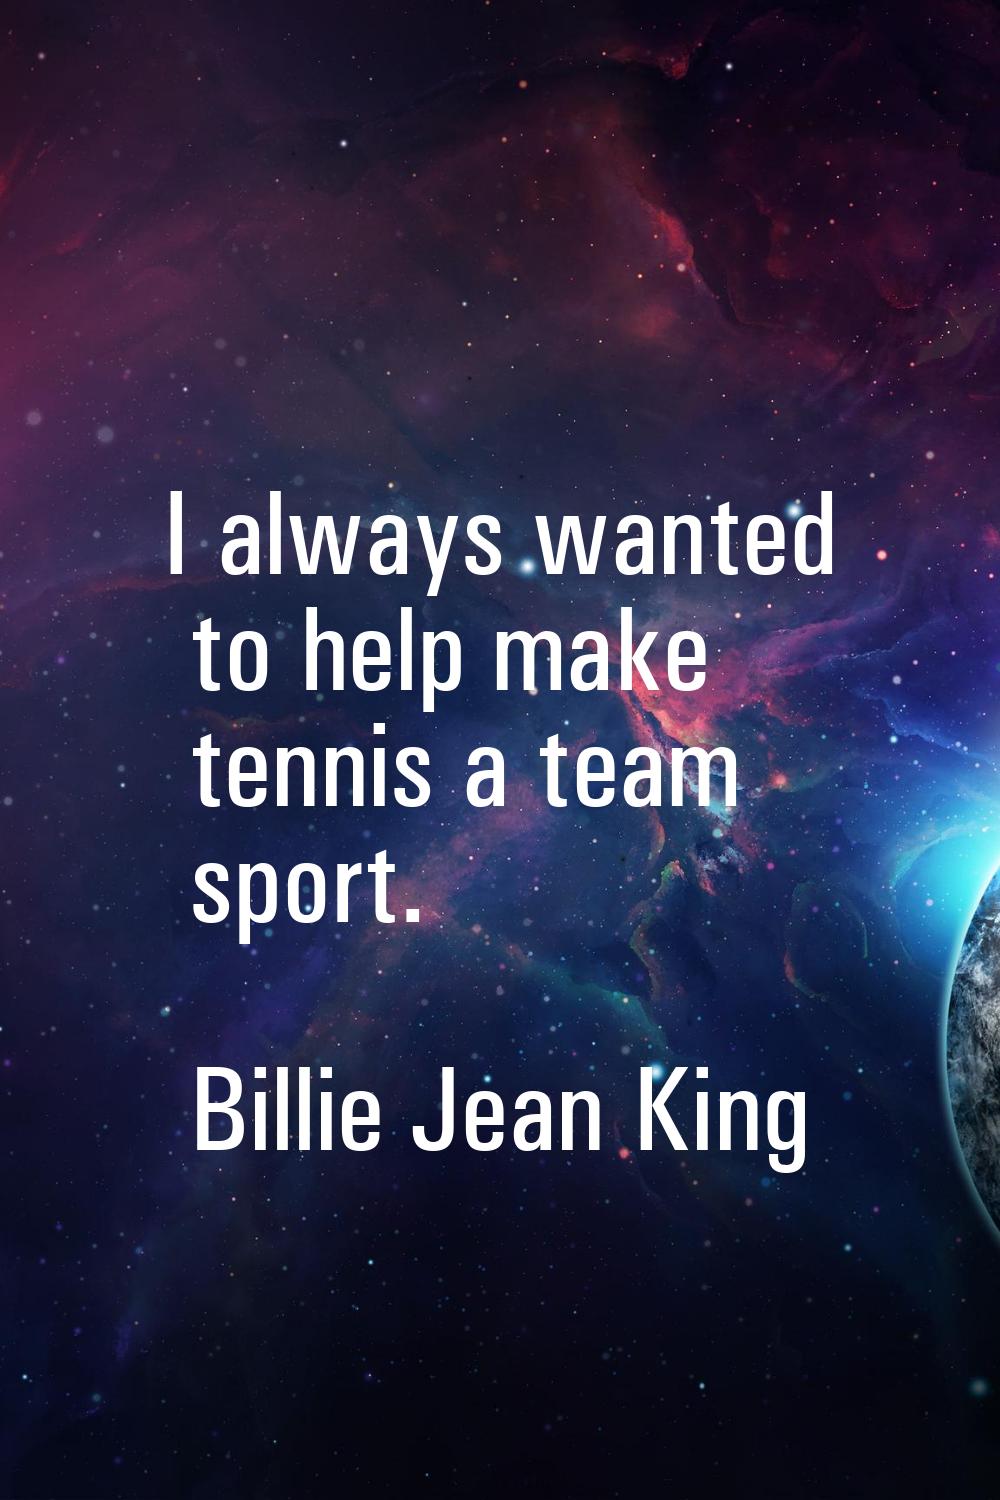 I always wanted to help make tennis a team sport.